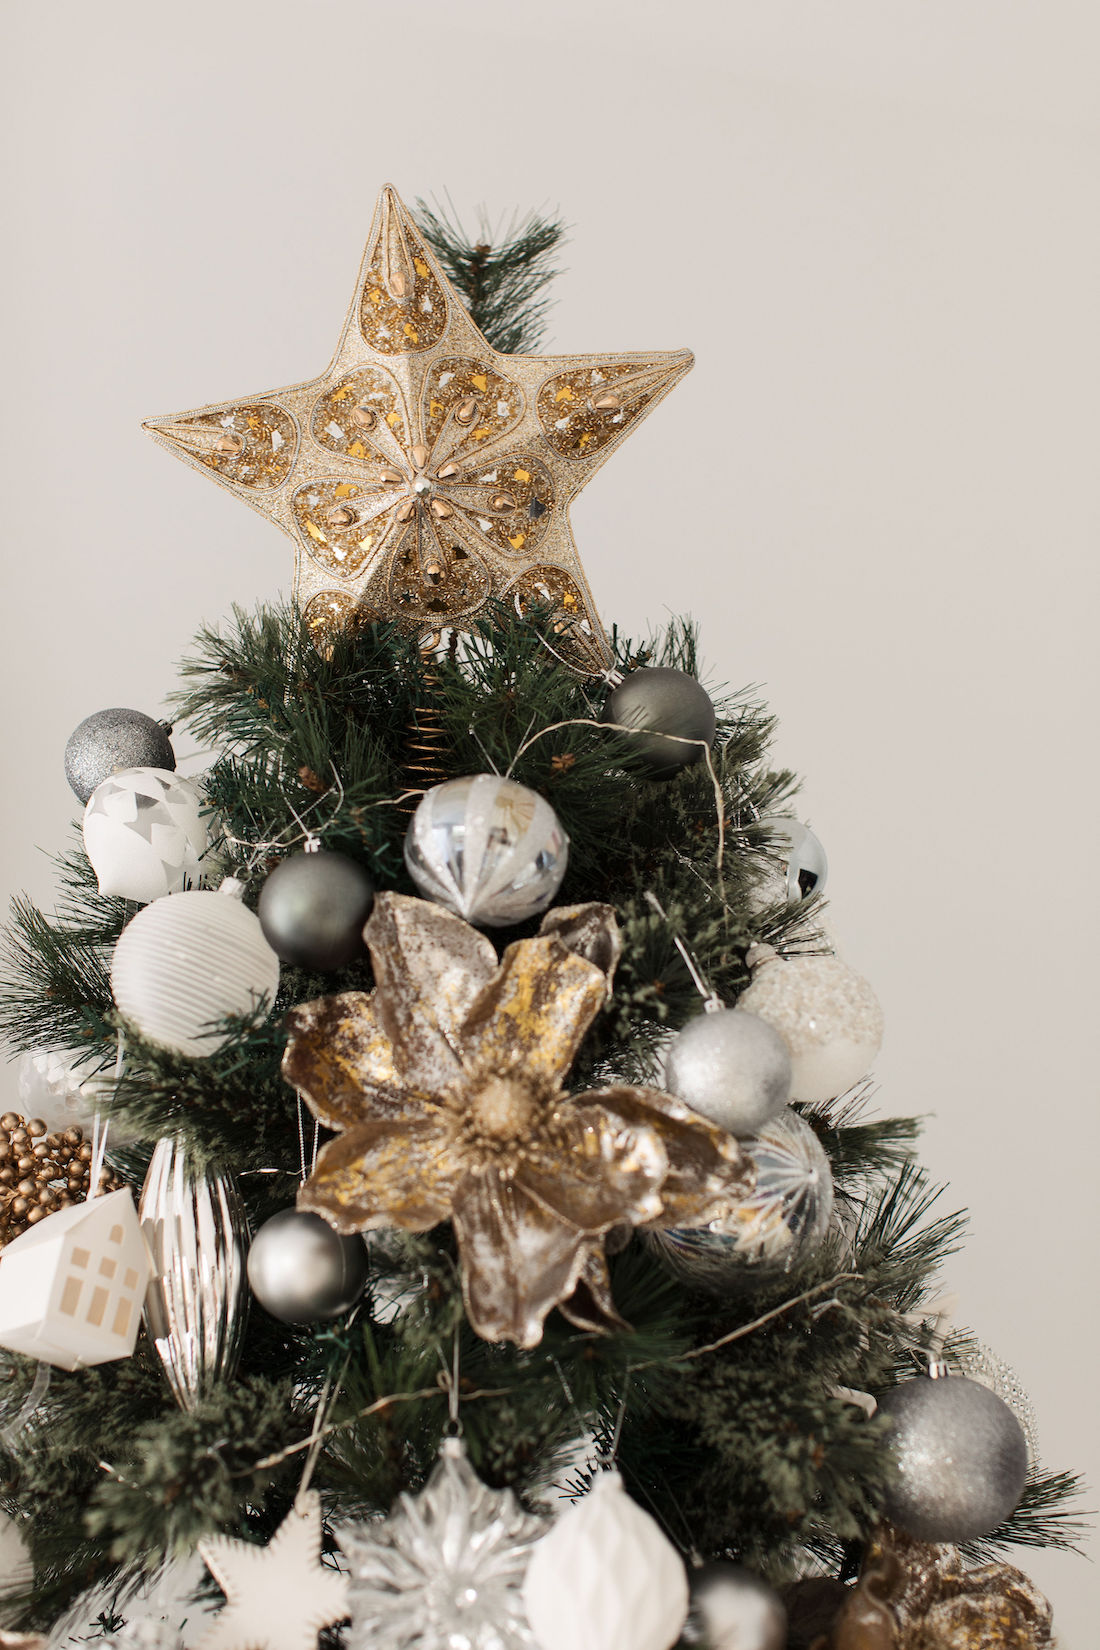 A Christmas tree styling tips is to add a star or angel on top of your tree